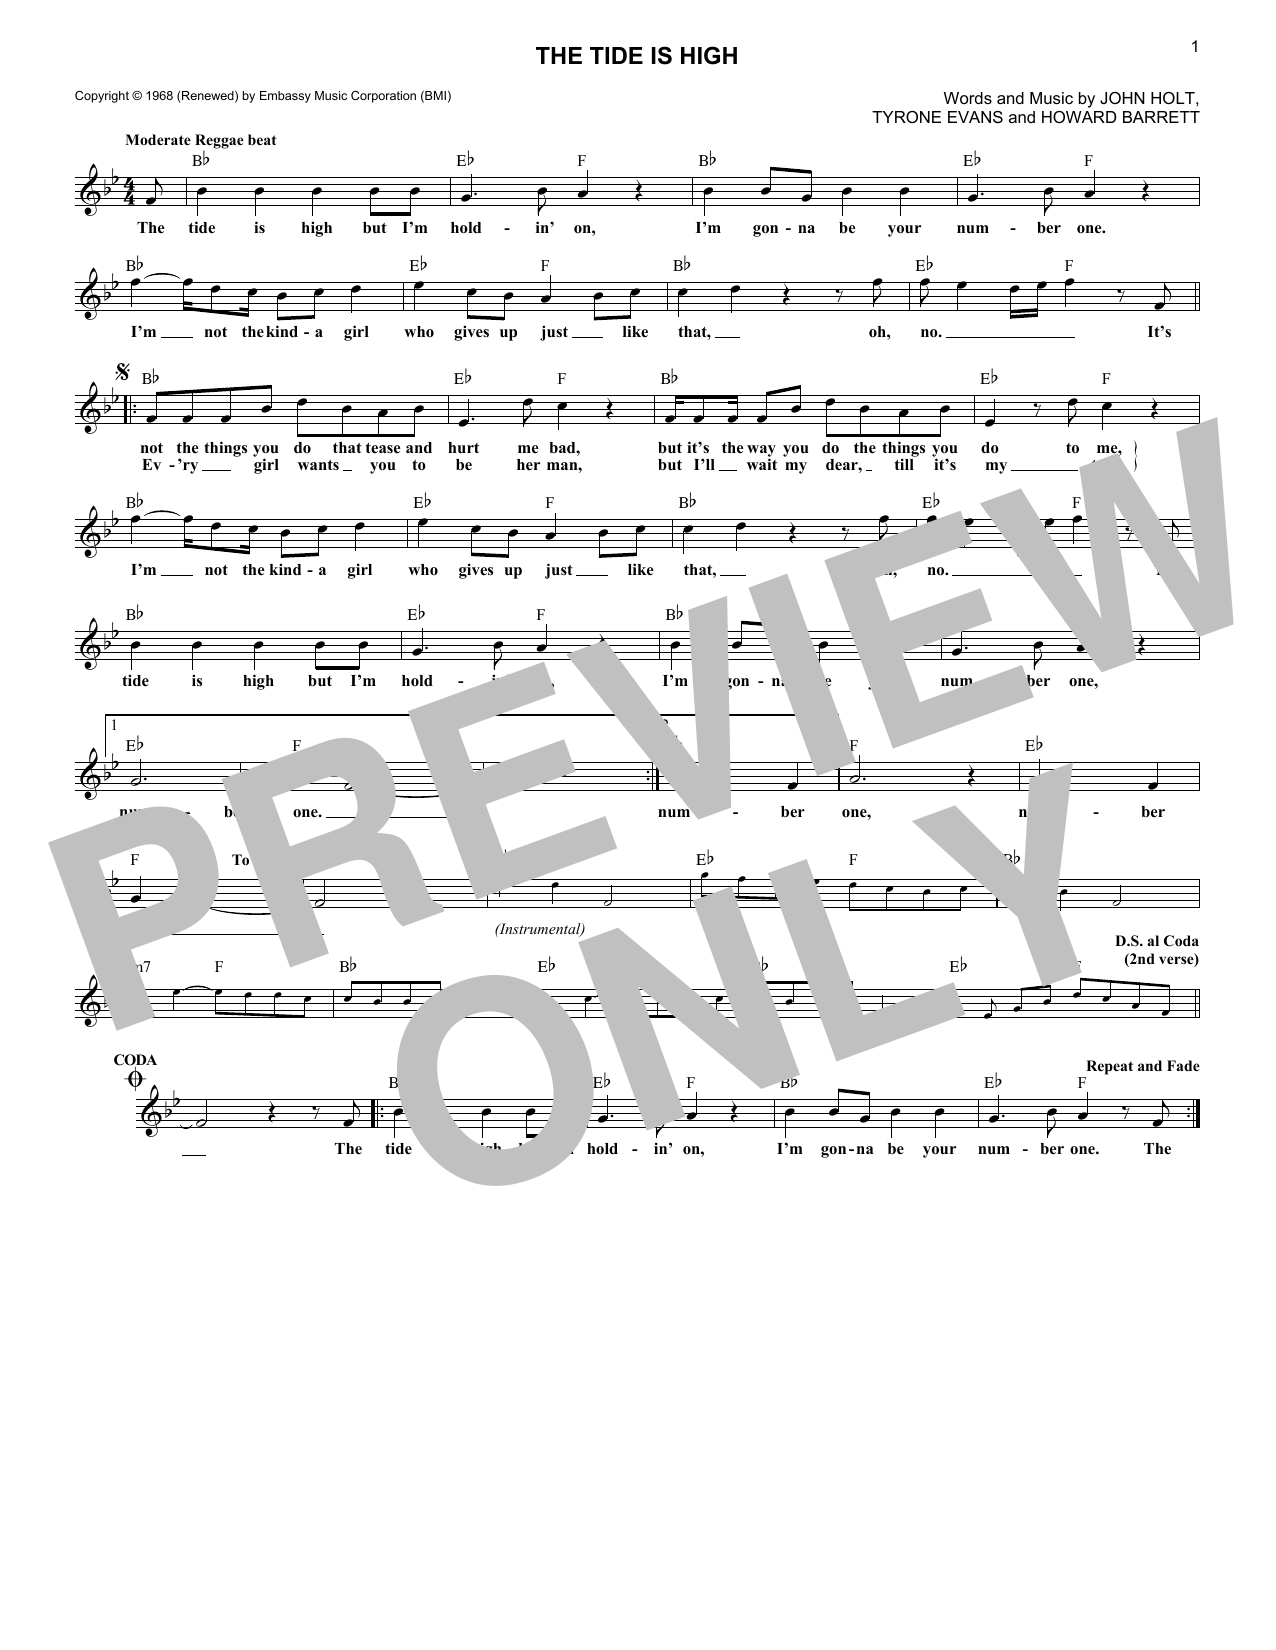 Blondie The Tide Is High sheet music notes and chords. Download Printable PDF.